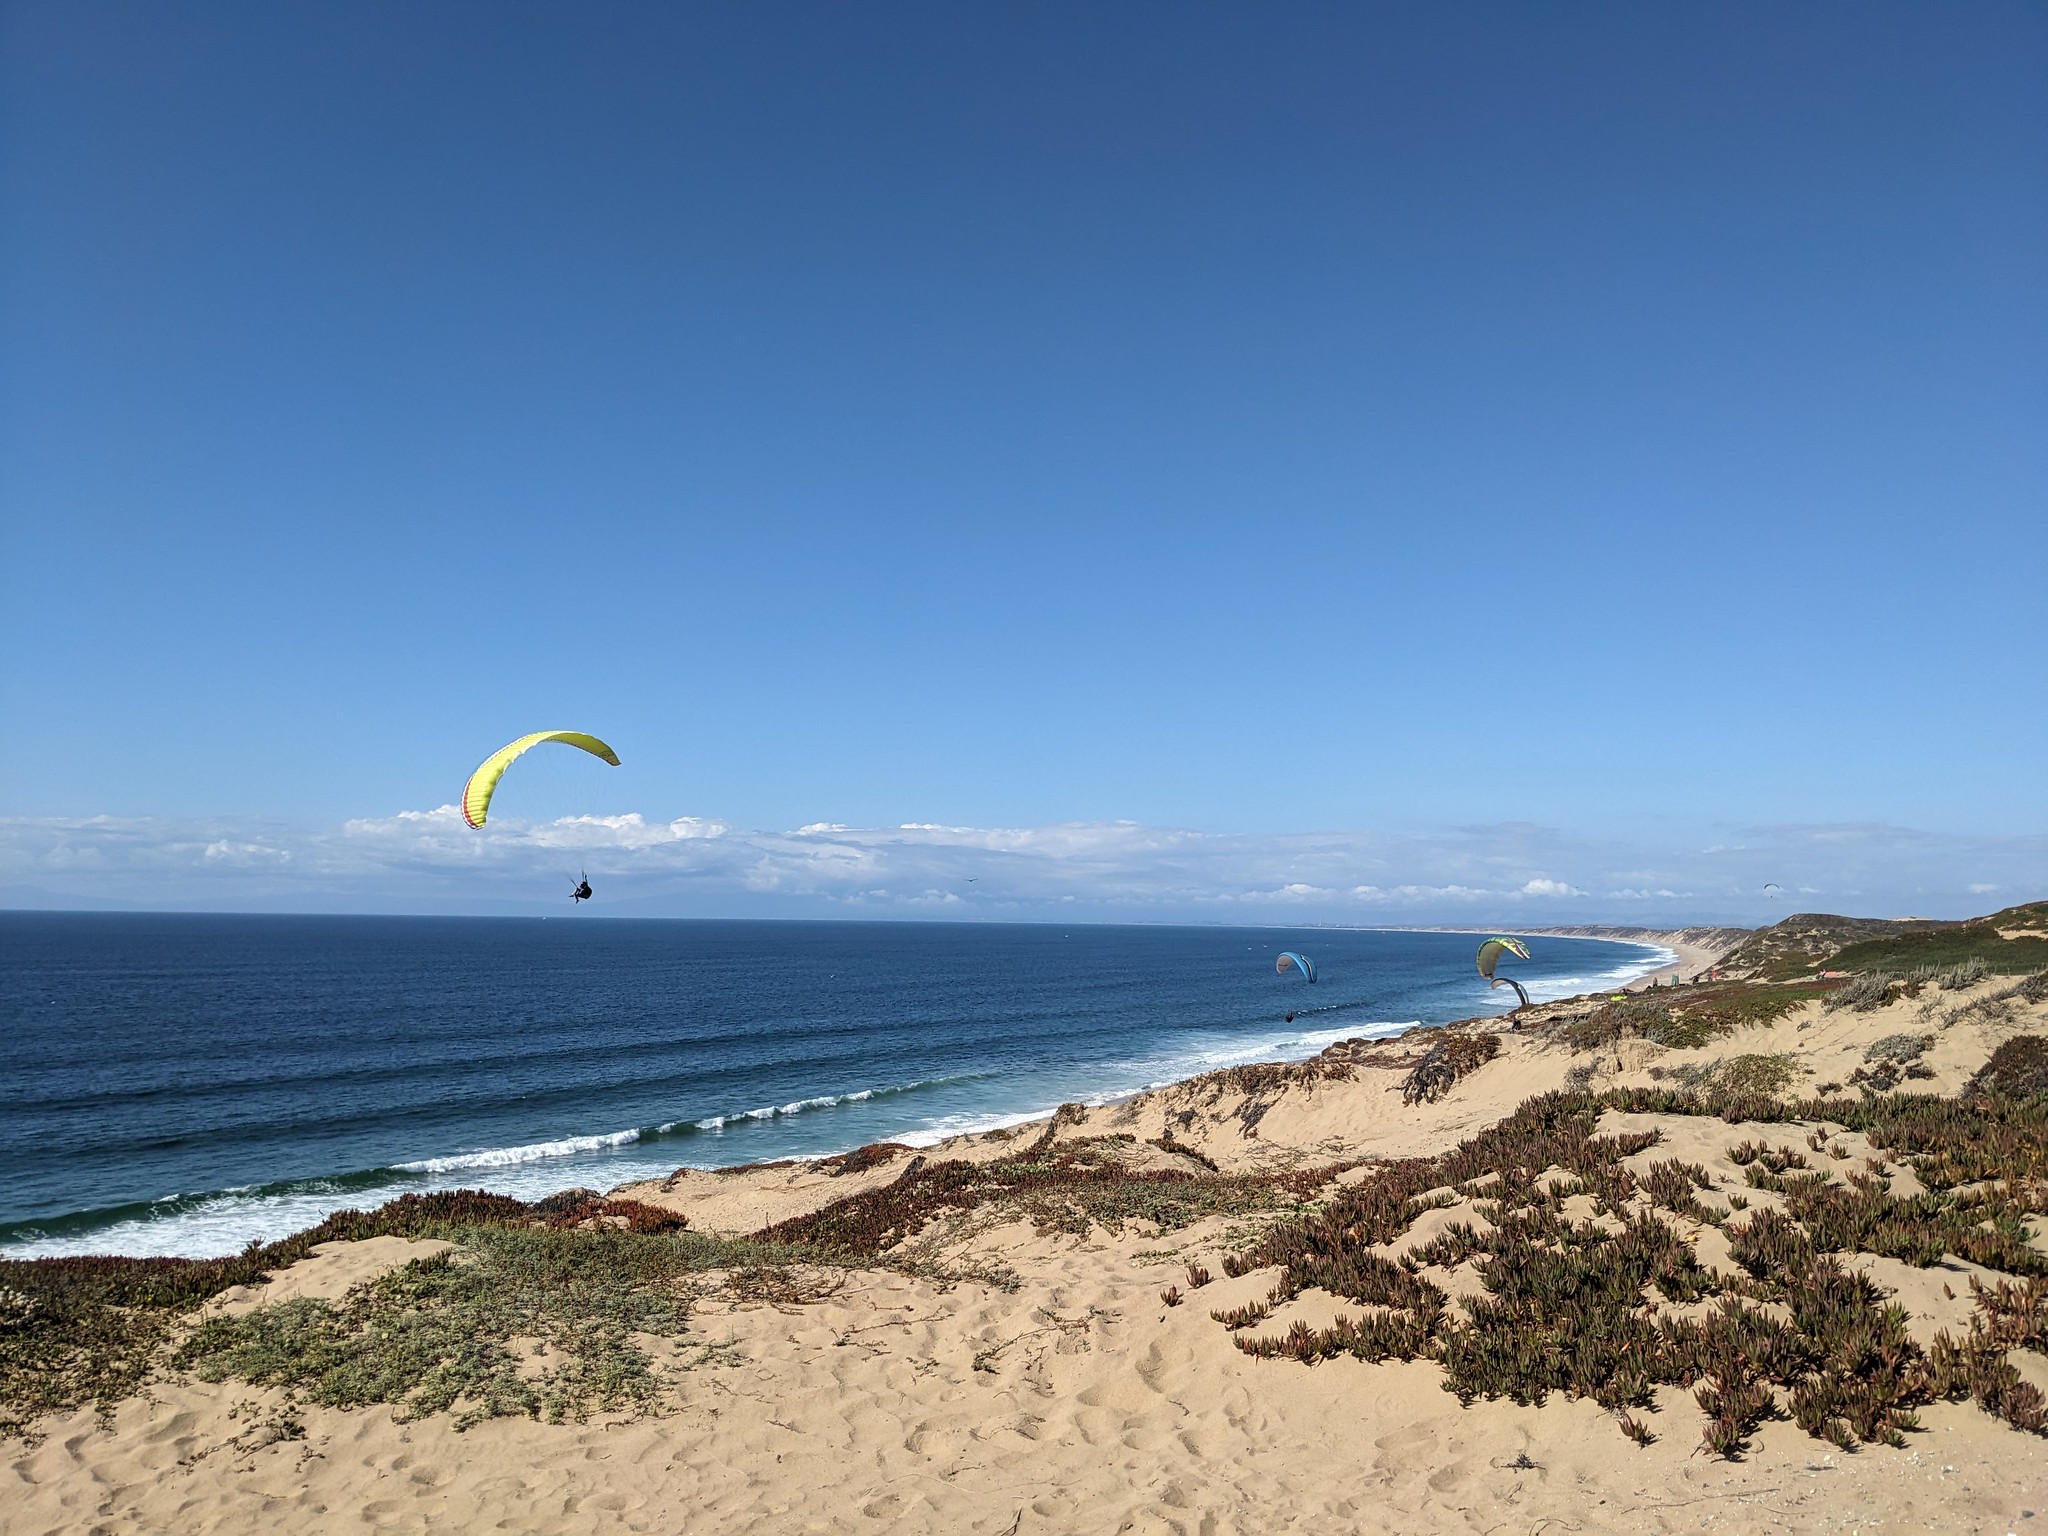 Paragliders floating off the coast